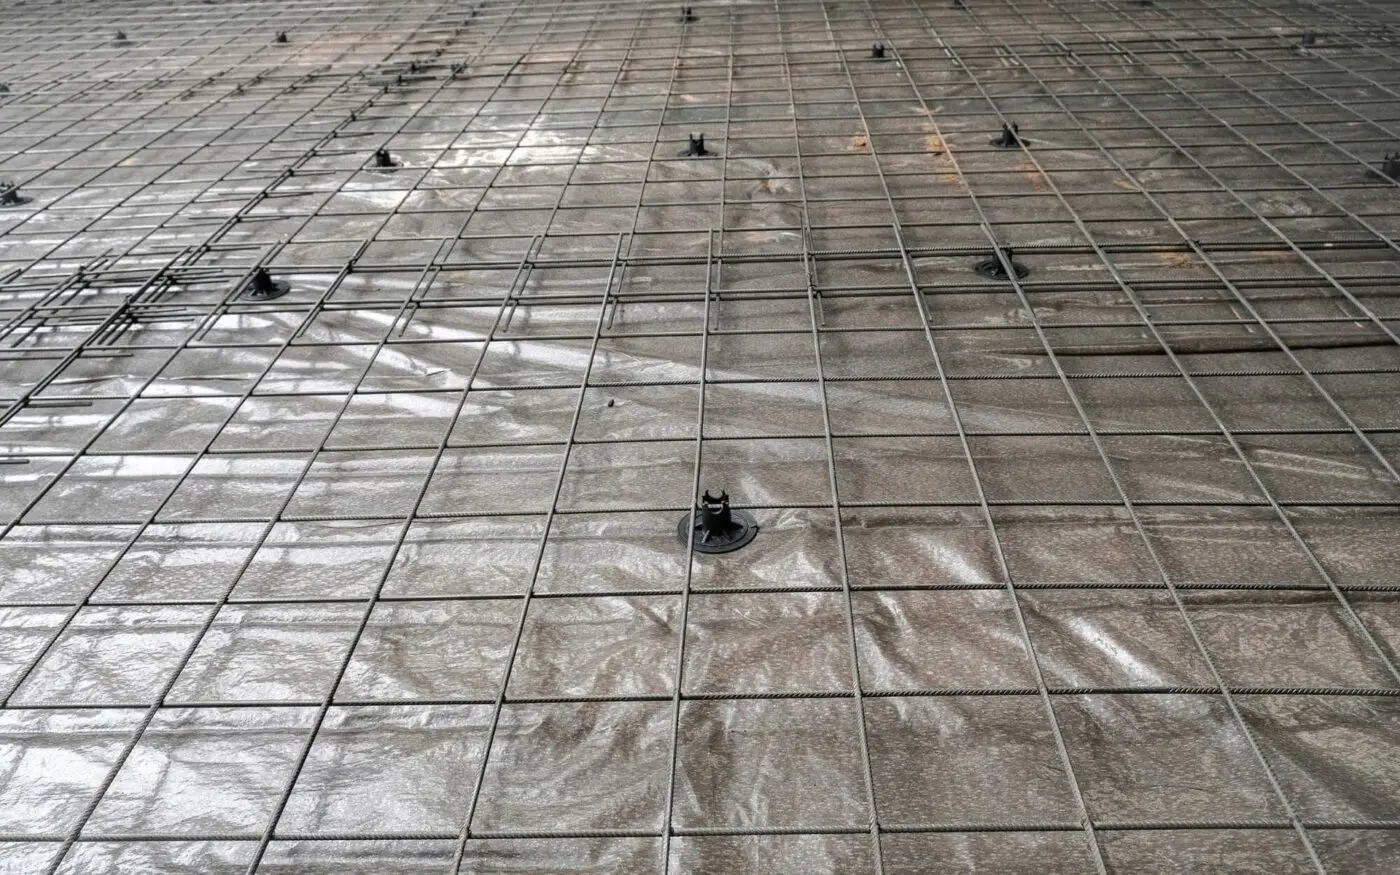 A close-up view of a construction site floor in Miami shows a grid of steel reinforcement bars placed over a plastic sheet, supported by small plastic spacers. The steel bars form a pattern of squares on the surface, an essential step before pouring concrete slabs often associated with Dade Decorative Concrete standards.